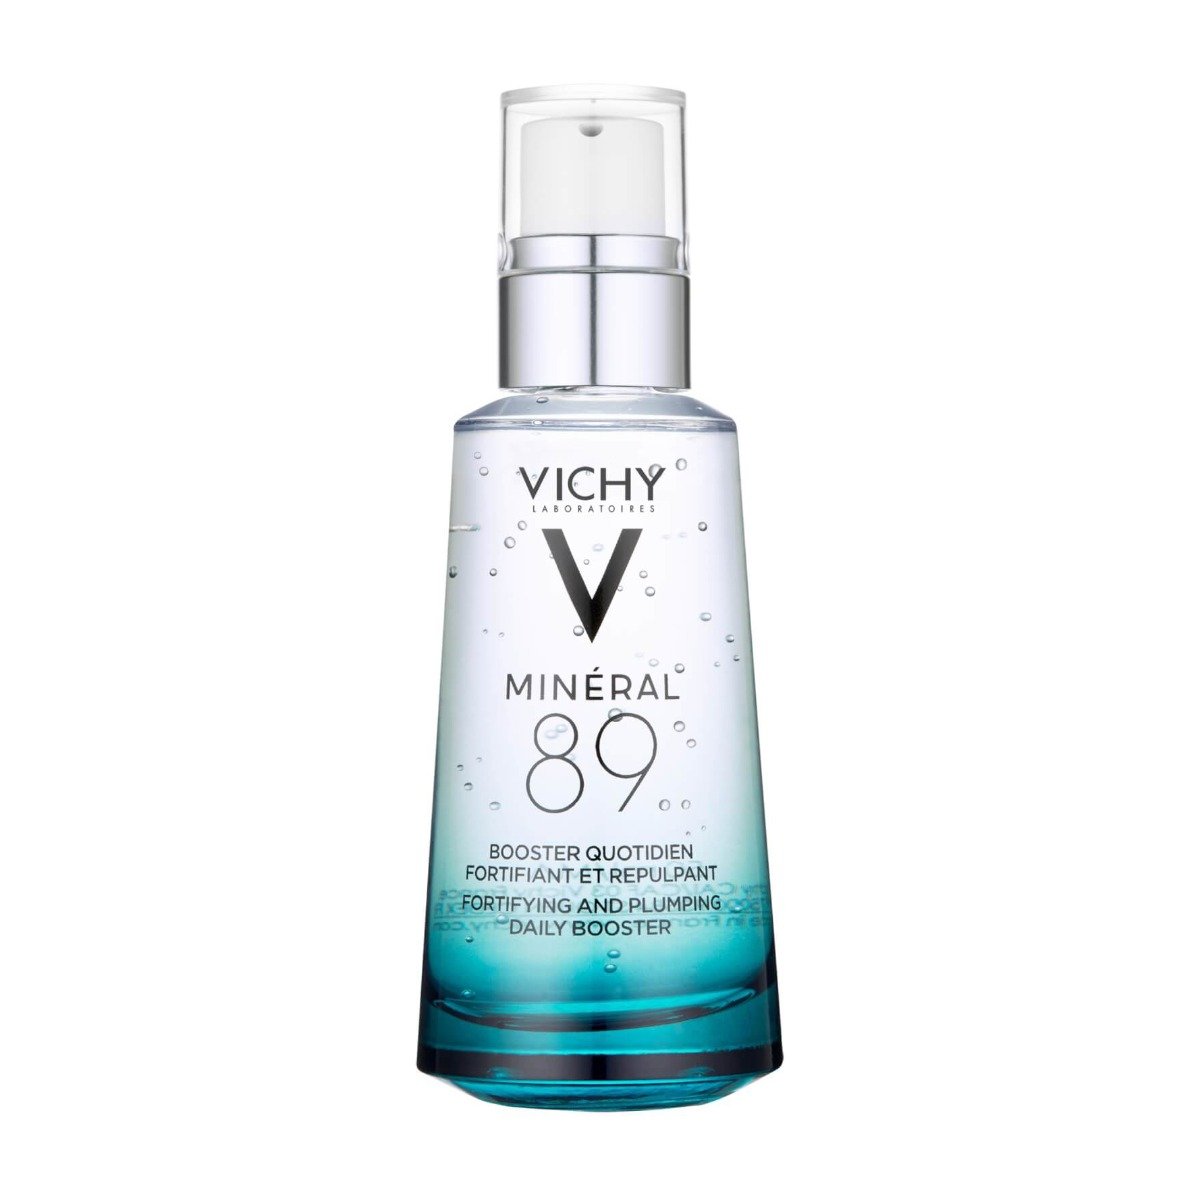 Vichy Mineral 89 Fortifying & Plumping Daily Booster - 50ml - Bloom Pharmacy